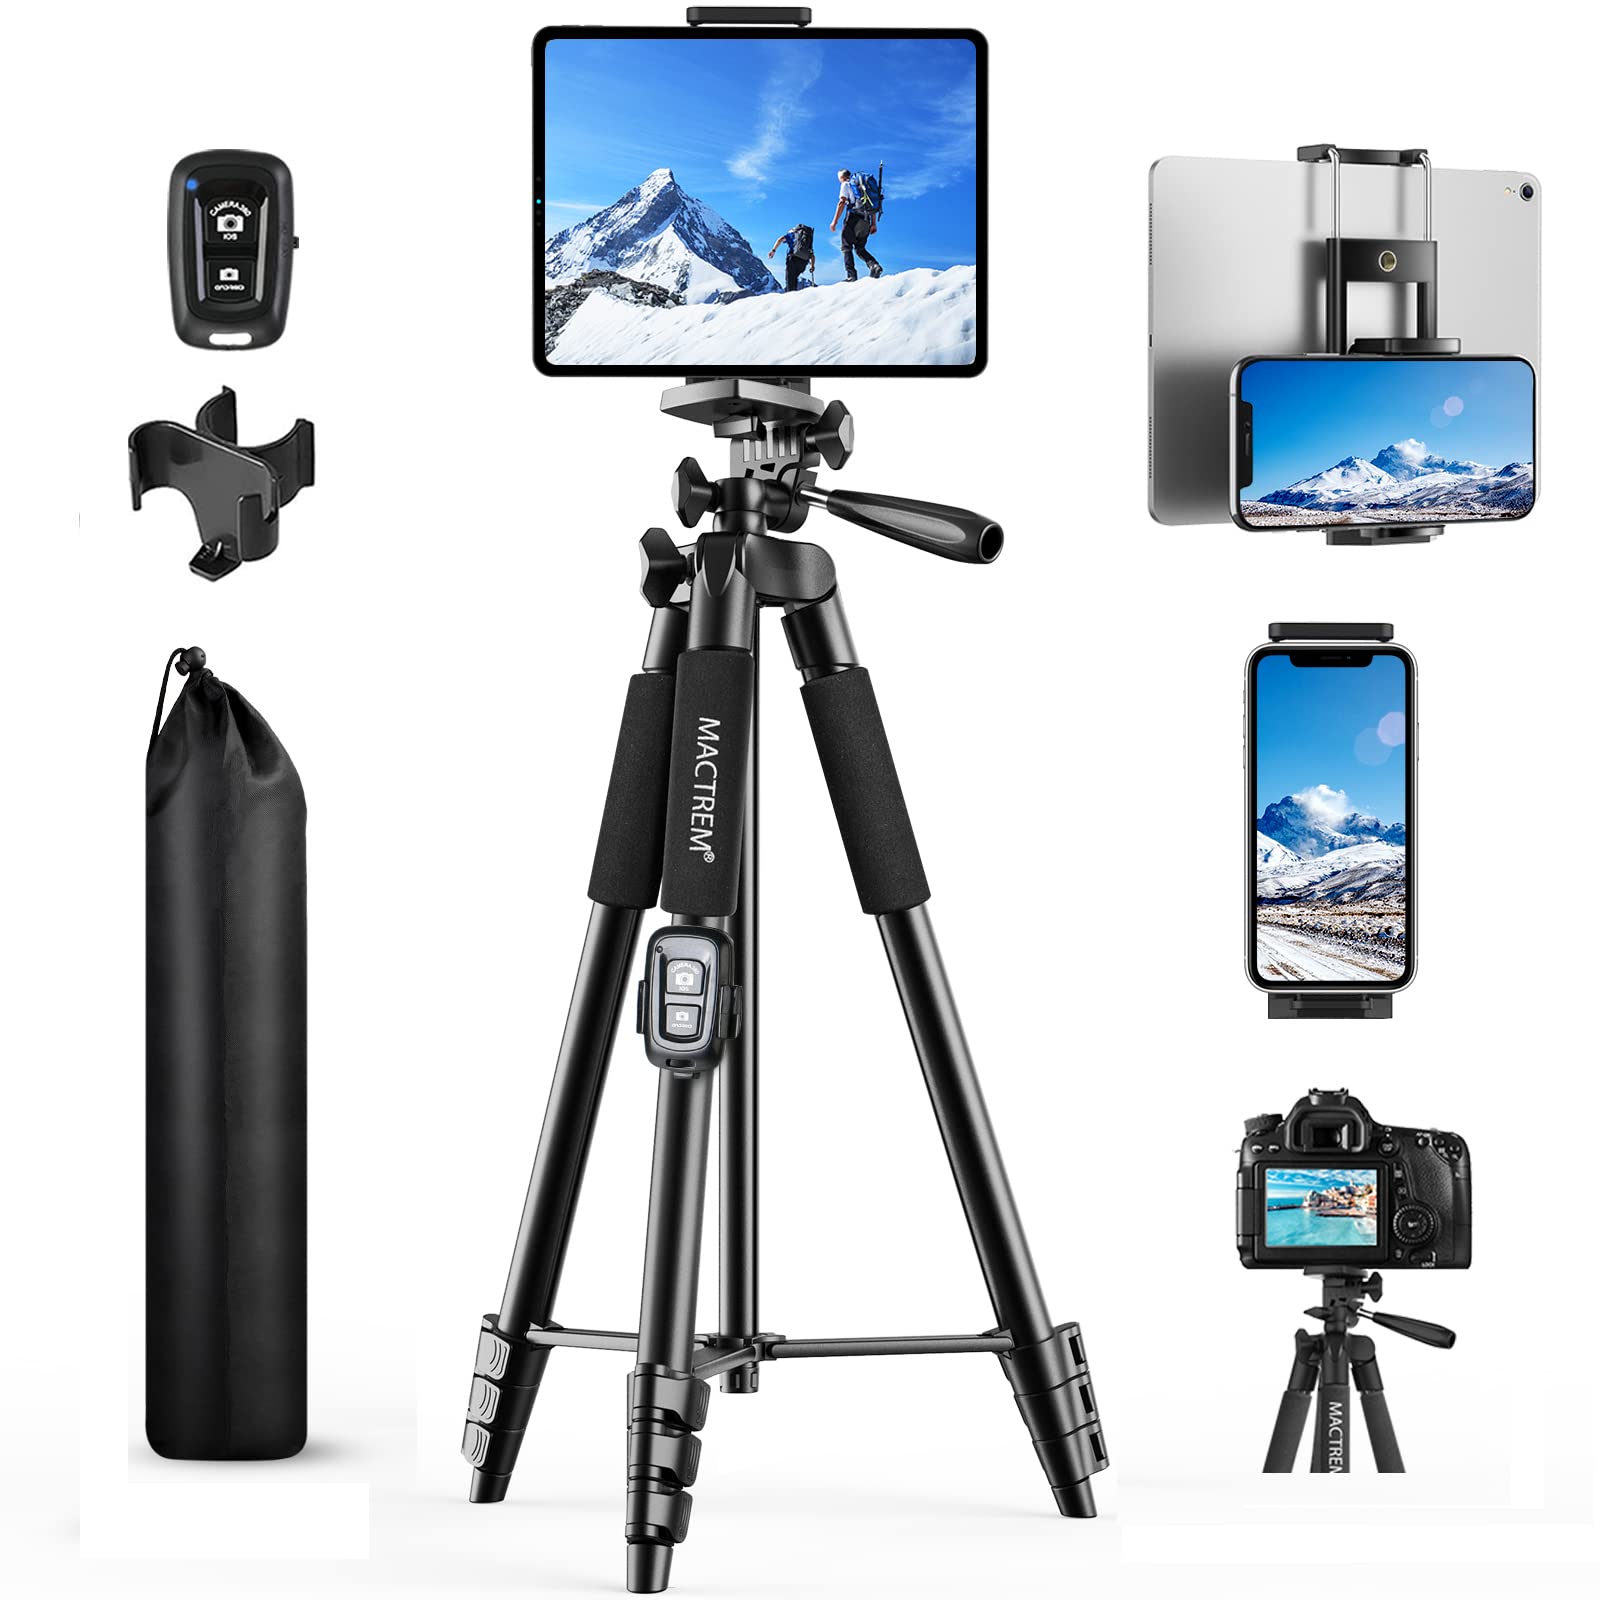 55 Phone Tripod, PHOPIK Aluminum Extendable Tripod Stand with Shutter,  Carrying Bag, Compatible with iPhone/Android/Sport Camera Perfect for Video